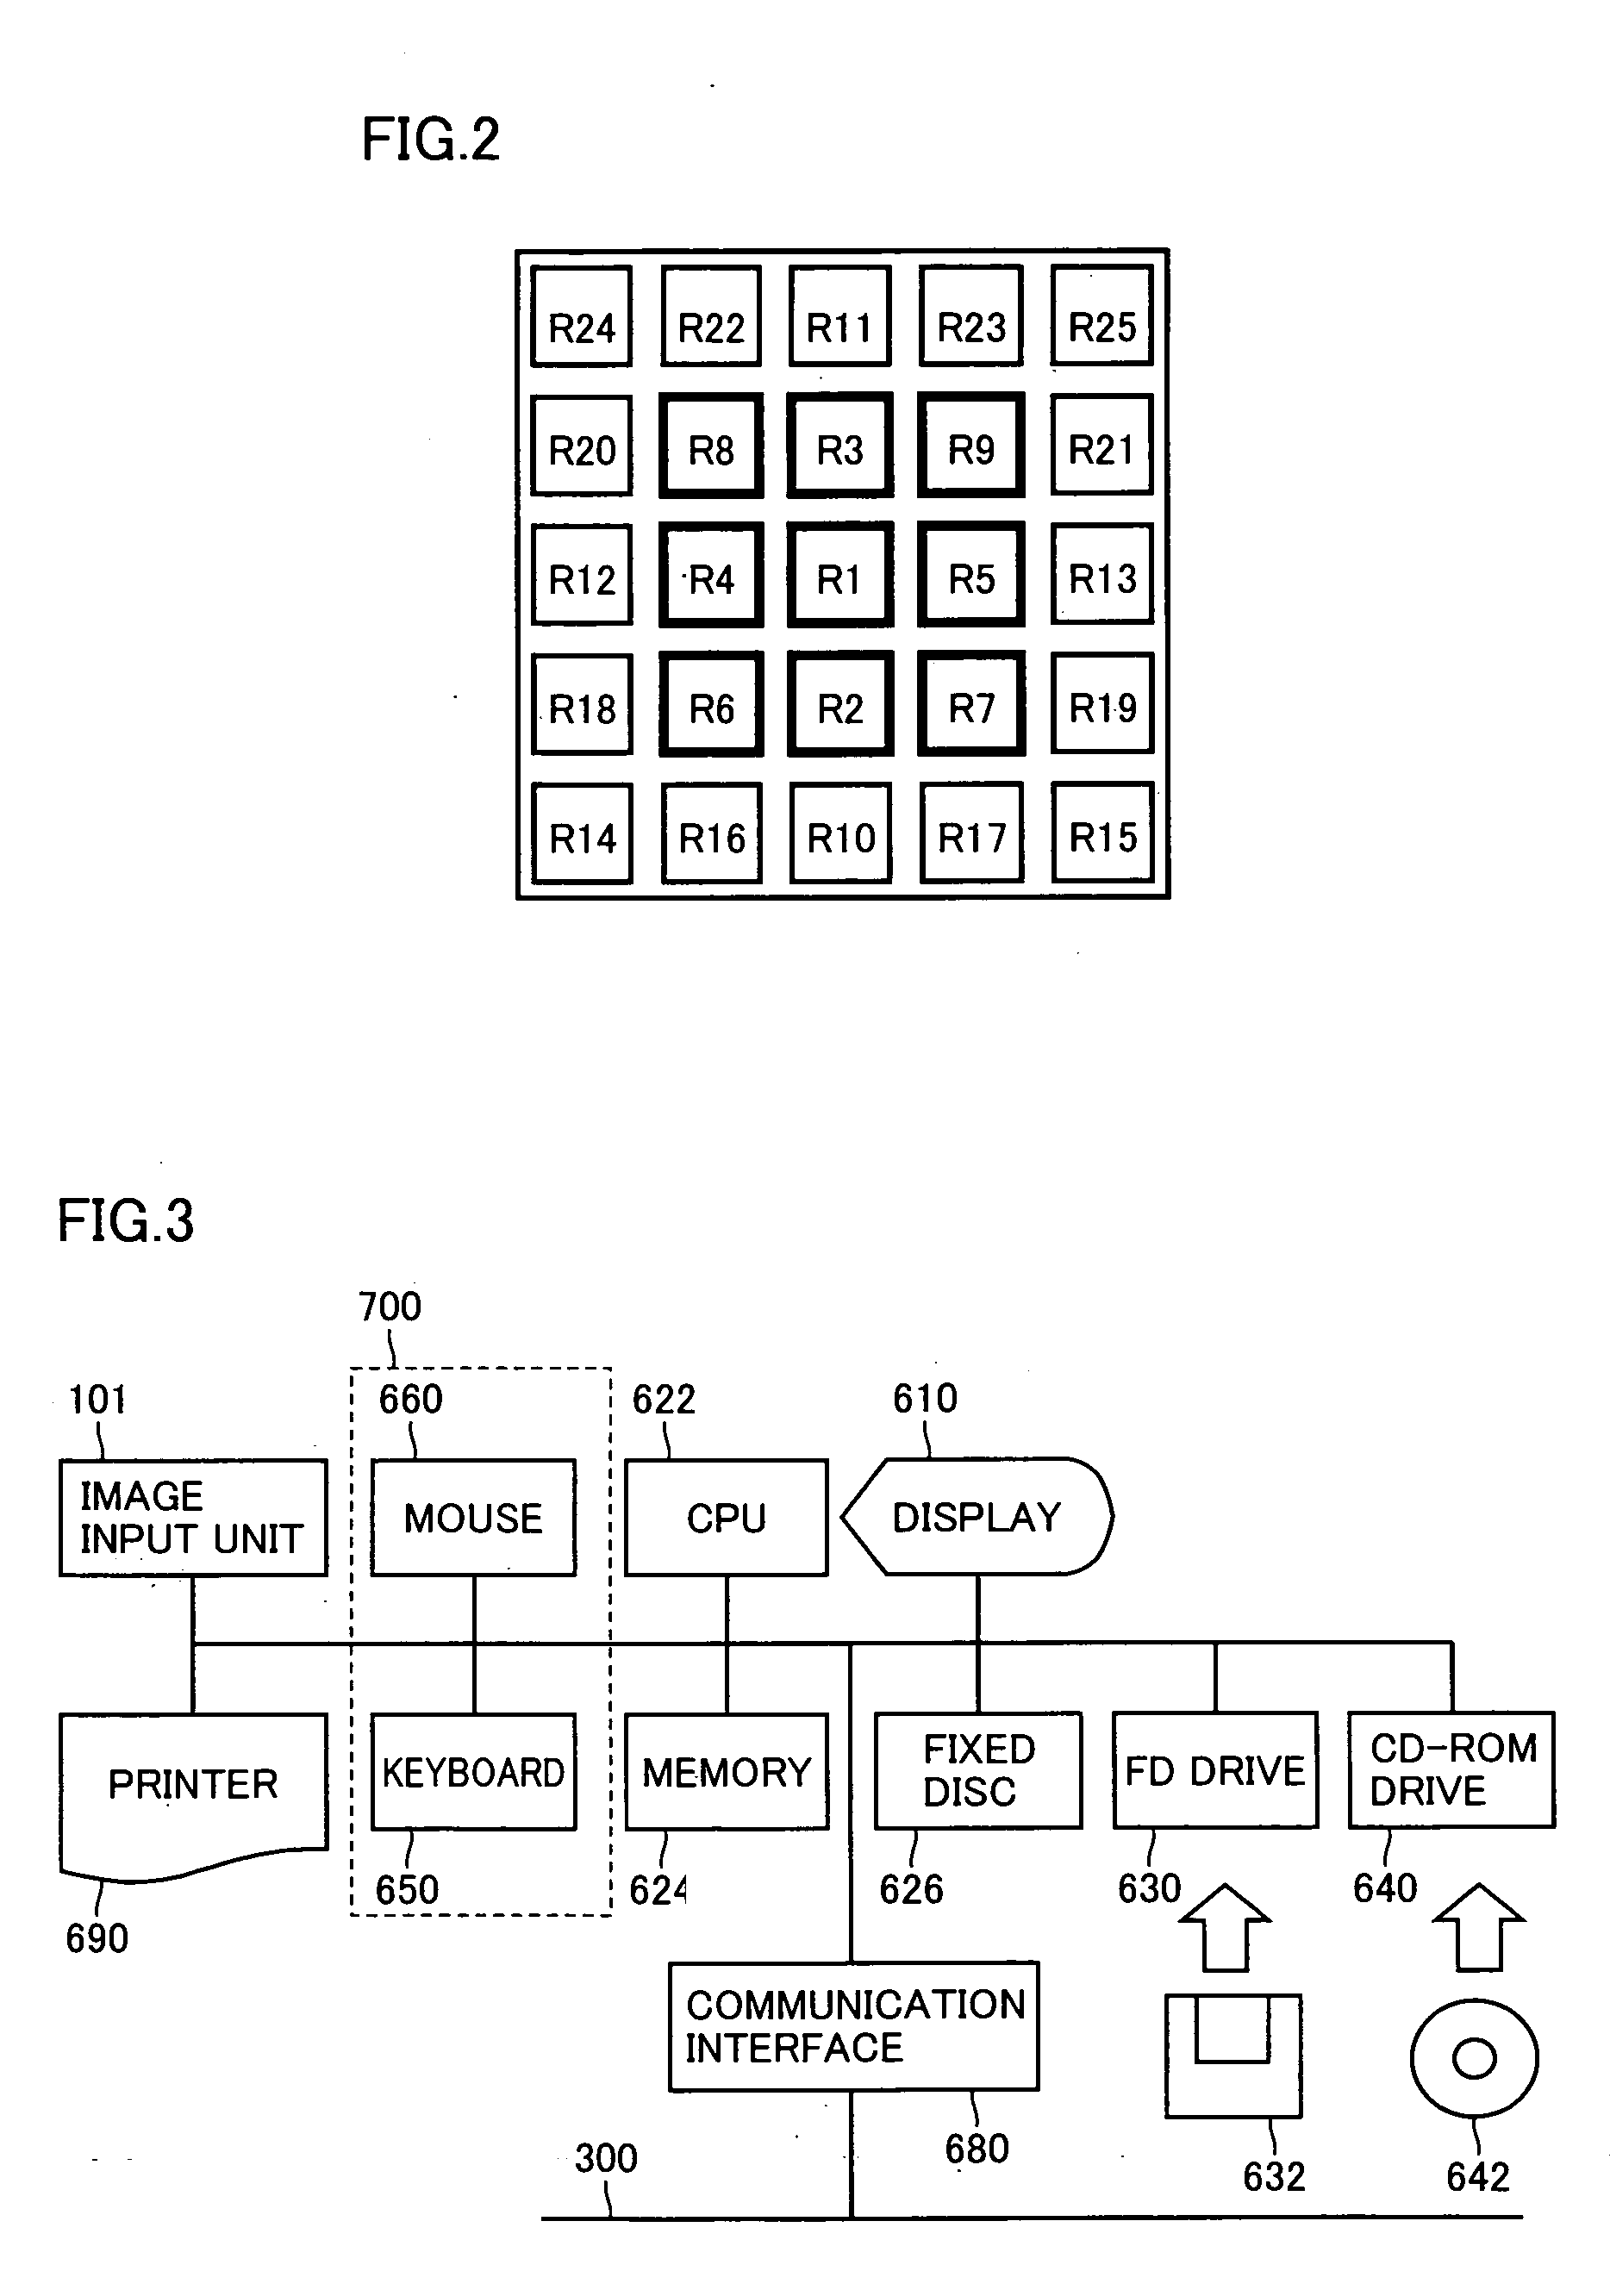 Image matching device capable of performing image matching process in short processing time with low power consumption